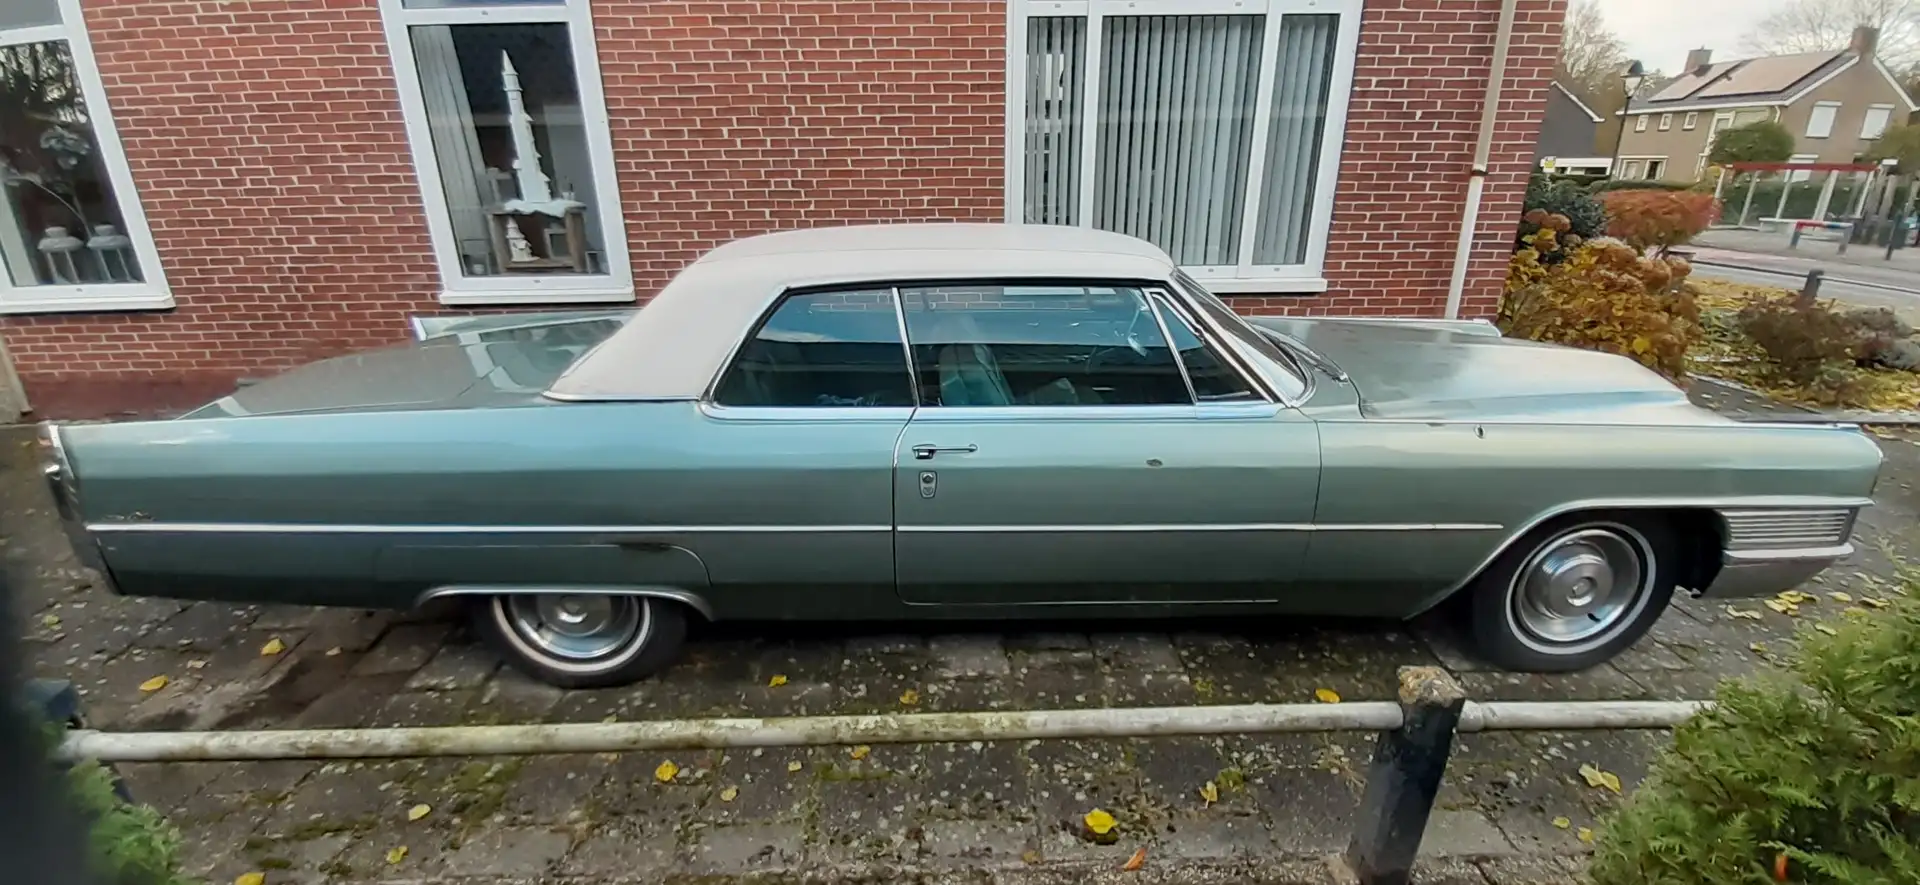 Cadillac Deville 6 CD 47 Coupe zelena - 1